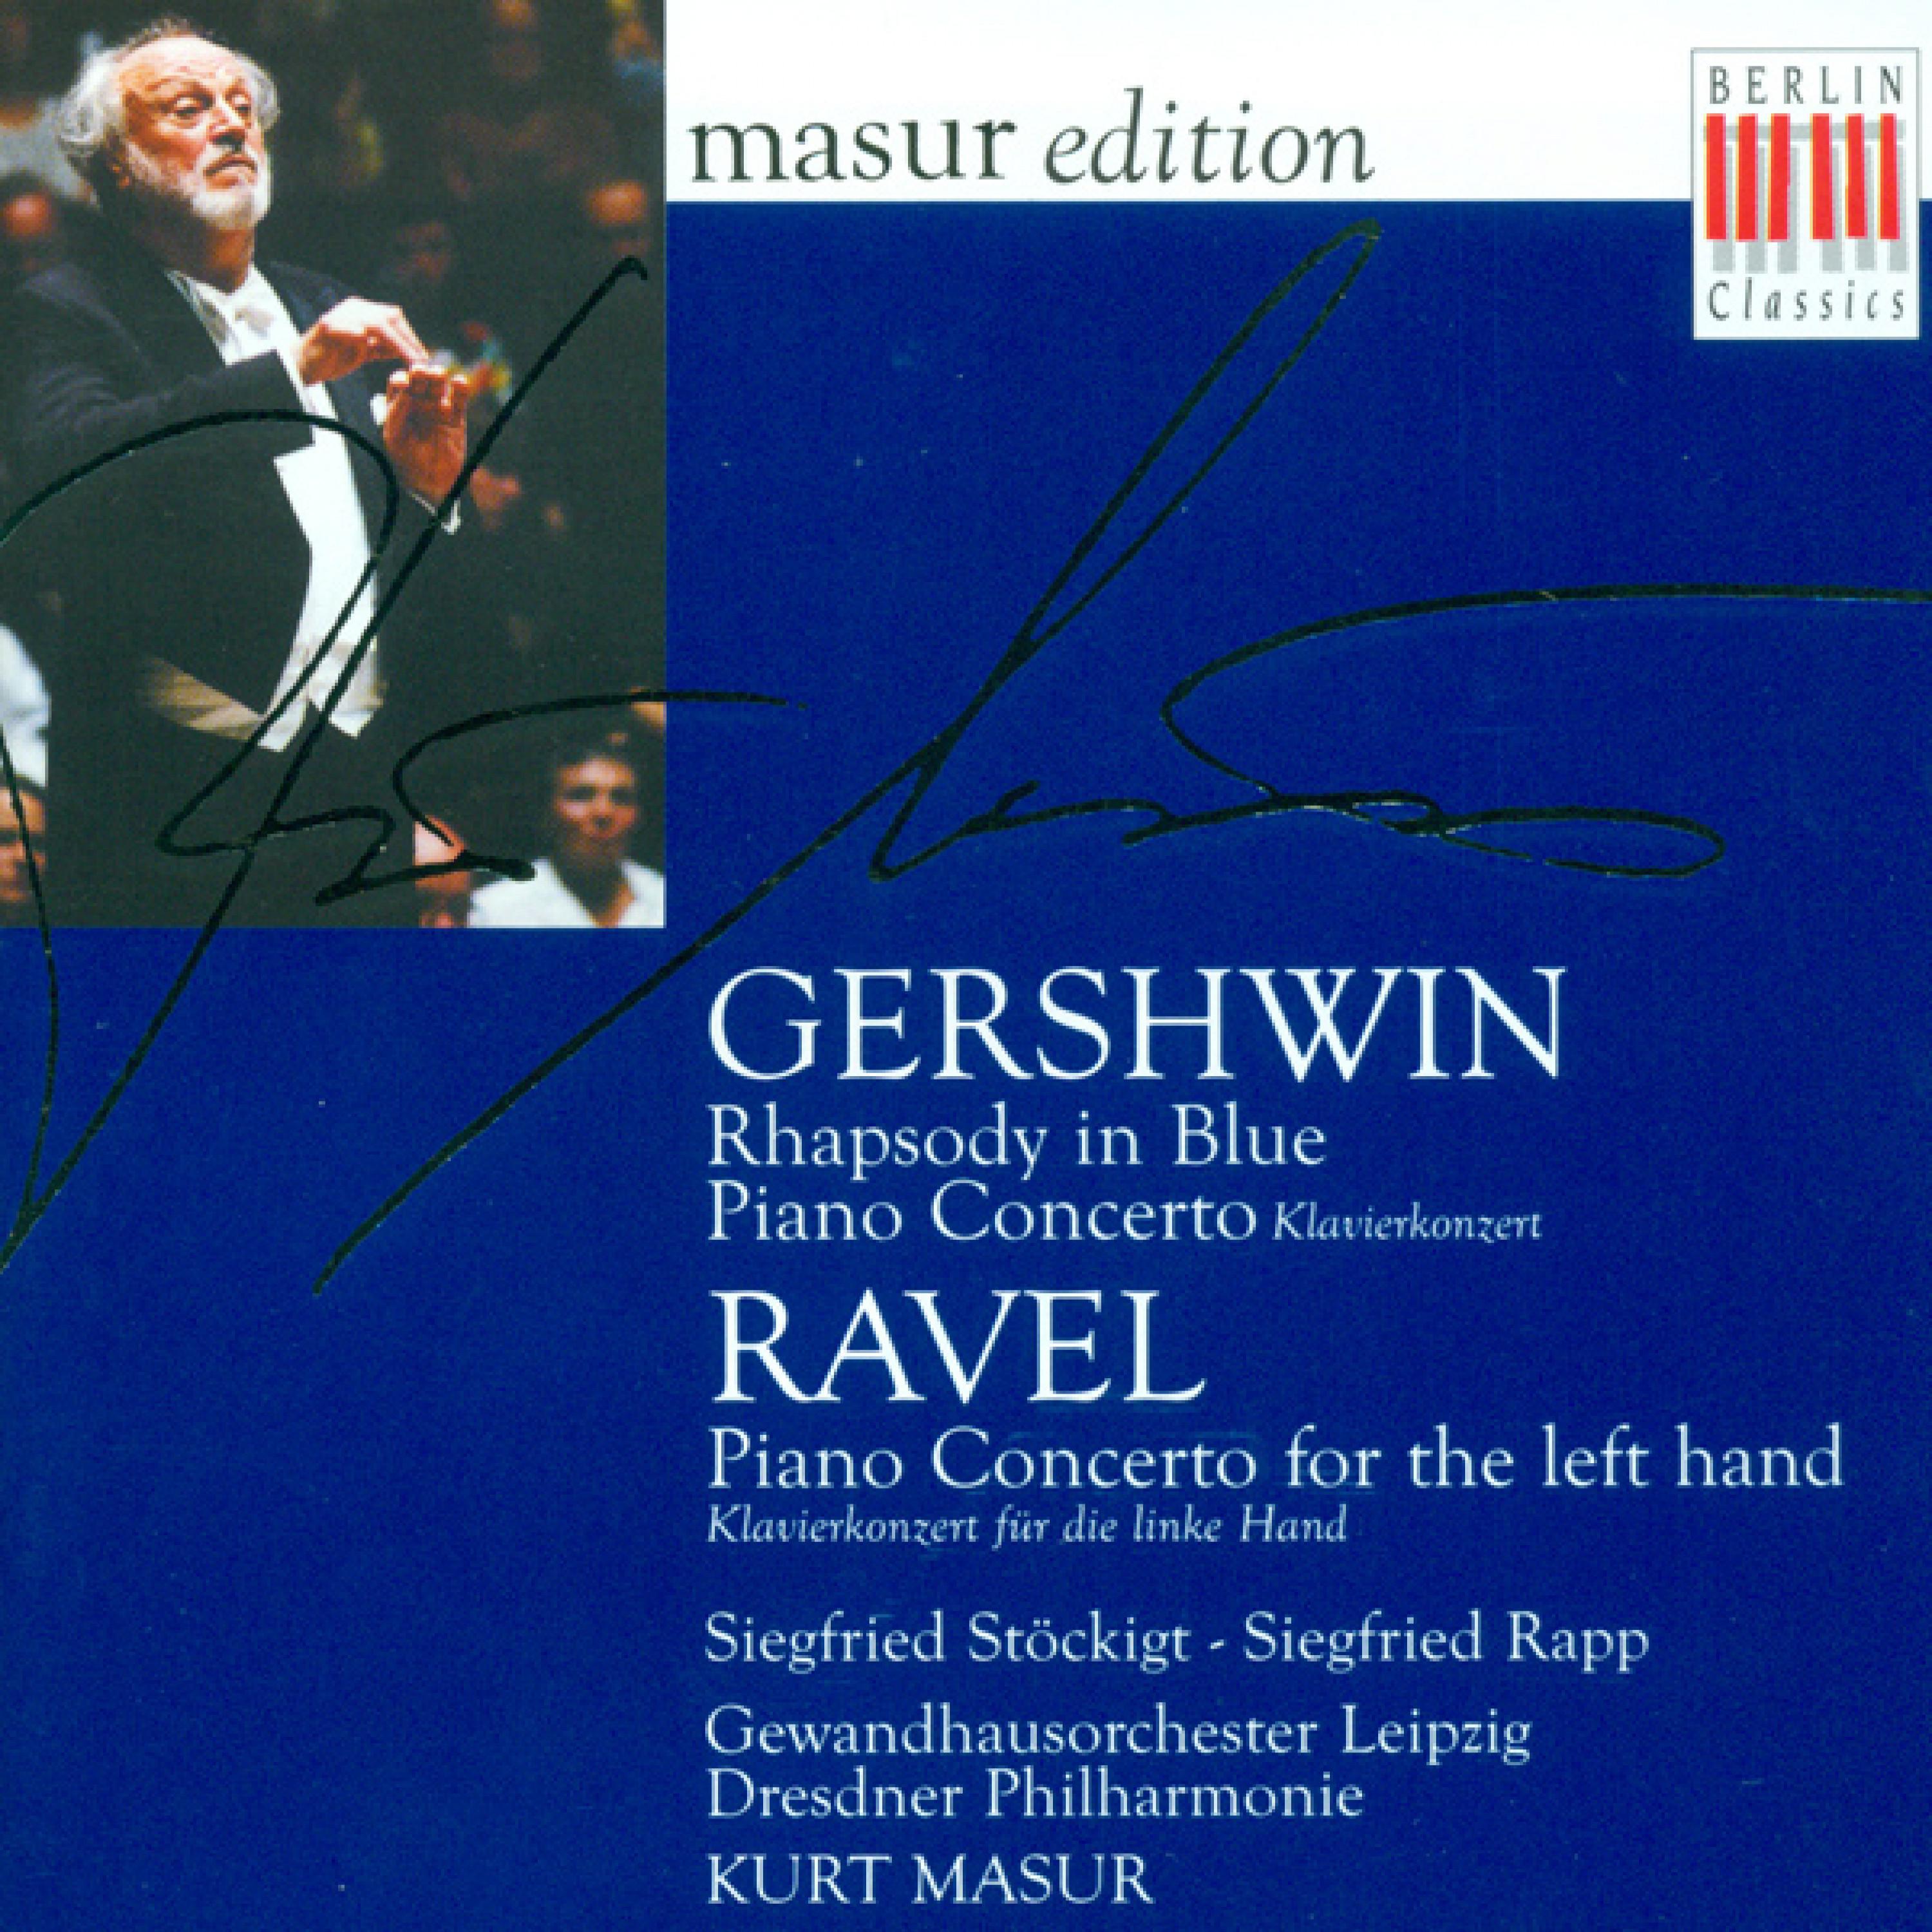 GERSHWIN, G.: Rhapsody in Blue / Piano Concerto in F Major / RAVEL, M.: Piano Concerto for the Left Hand (Rapp)